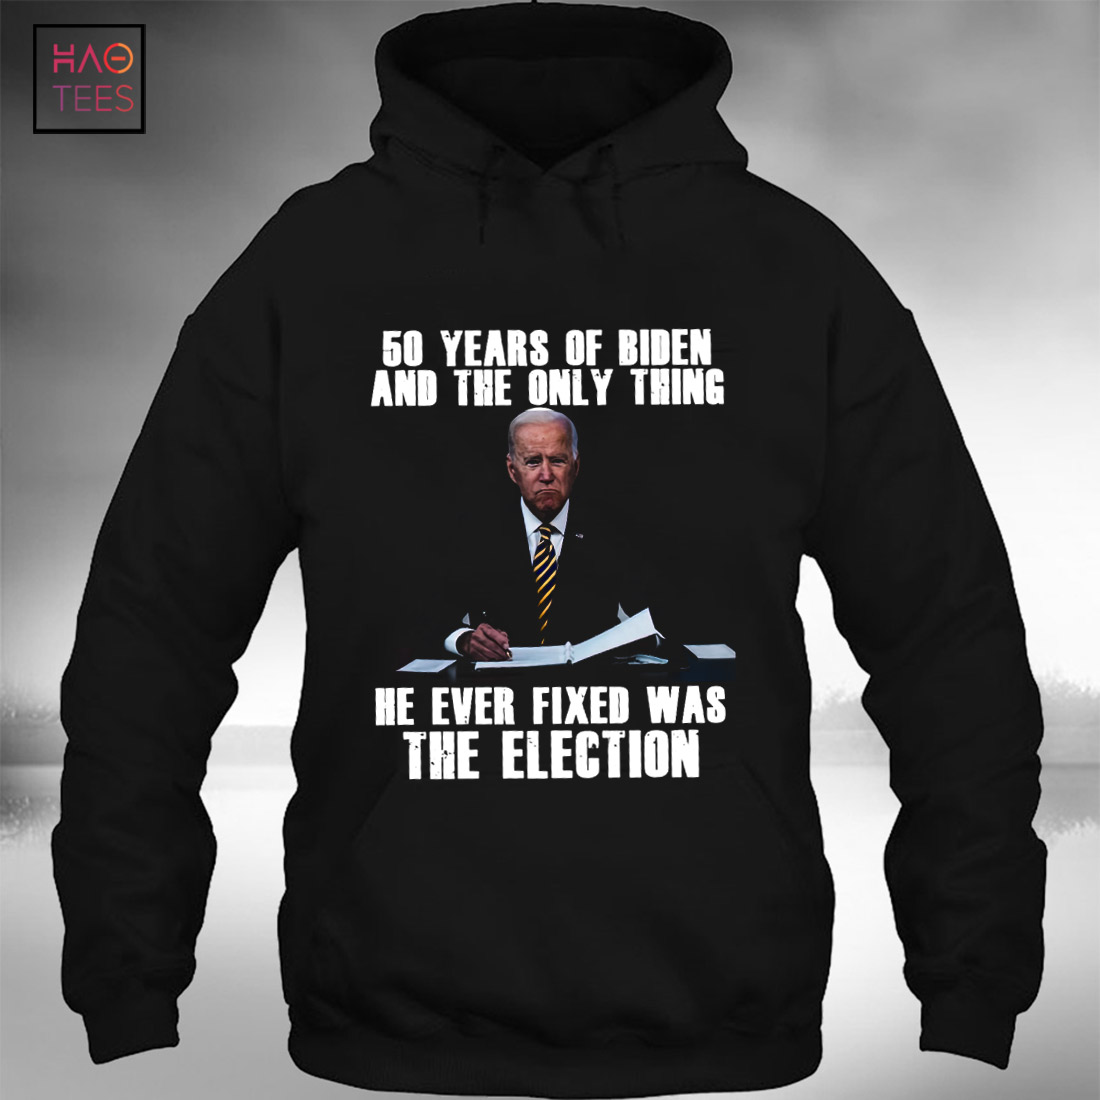 50 Years Of Biden And The Only Thing He ever Fixed Was The Election T-shirt Classic